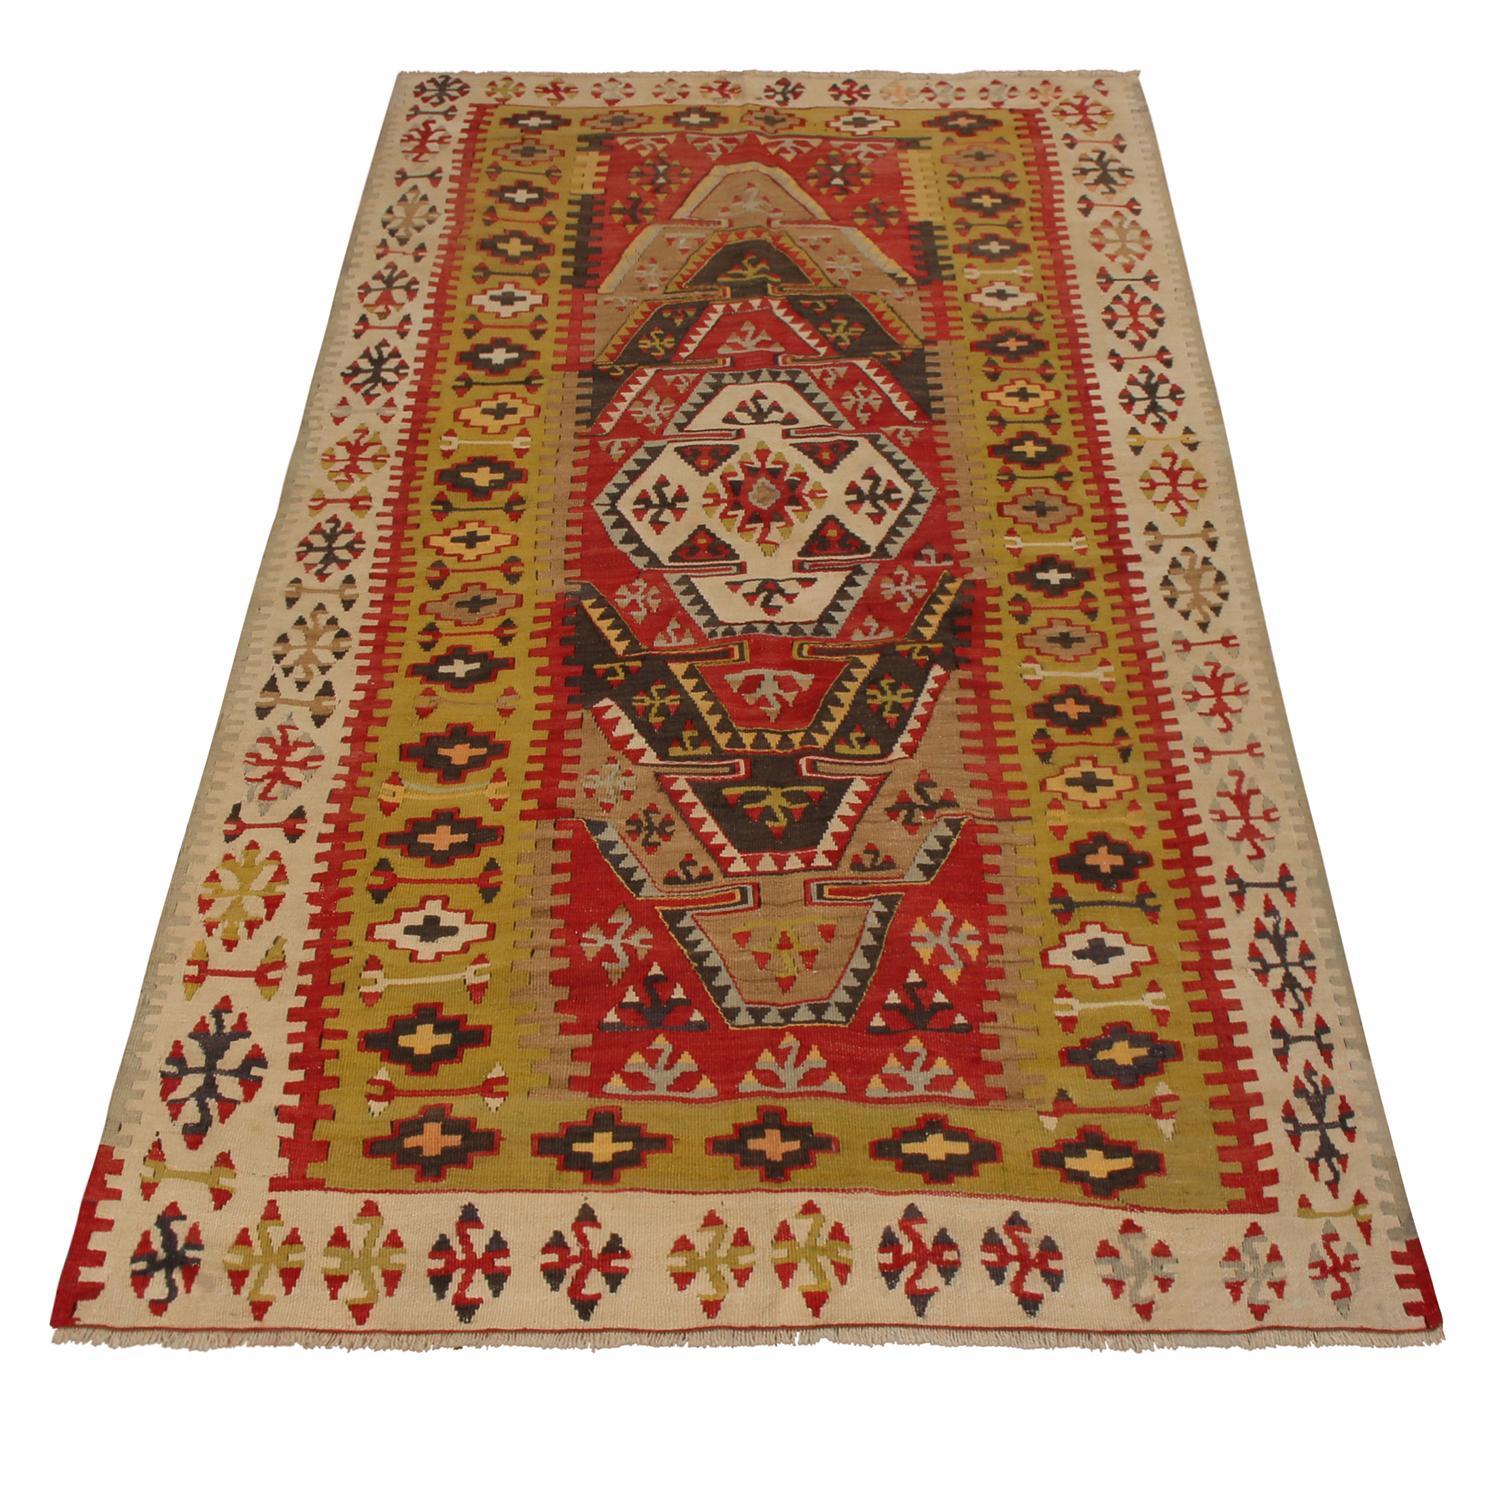 Originating from Turkey between 1940-1950, this vintage Sivas wool Kilim rug enjoys a departure from traditional colorways sensibilities among its family of rugs, hosting a lighter background of cream colorways accented by the tribal, vibrant blue,